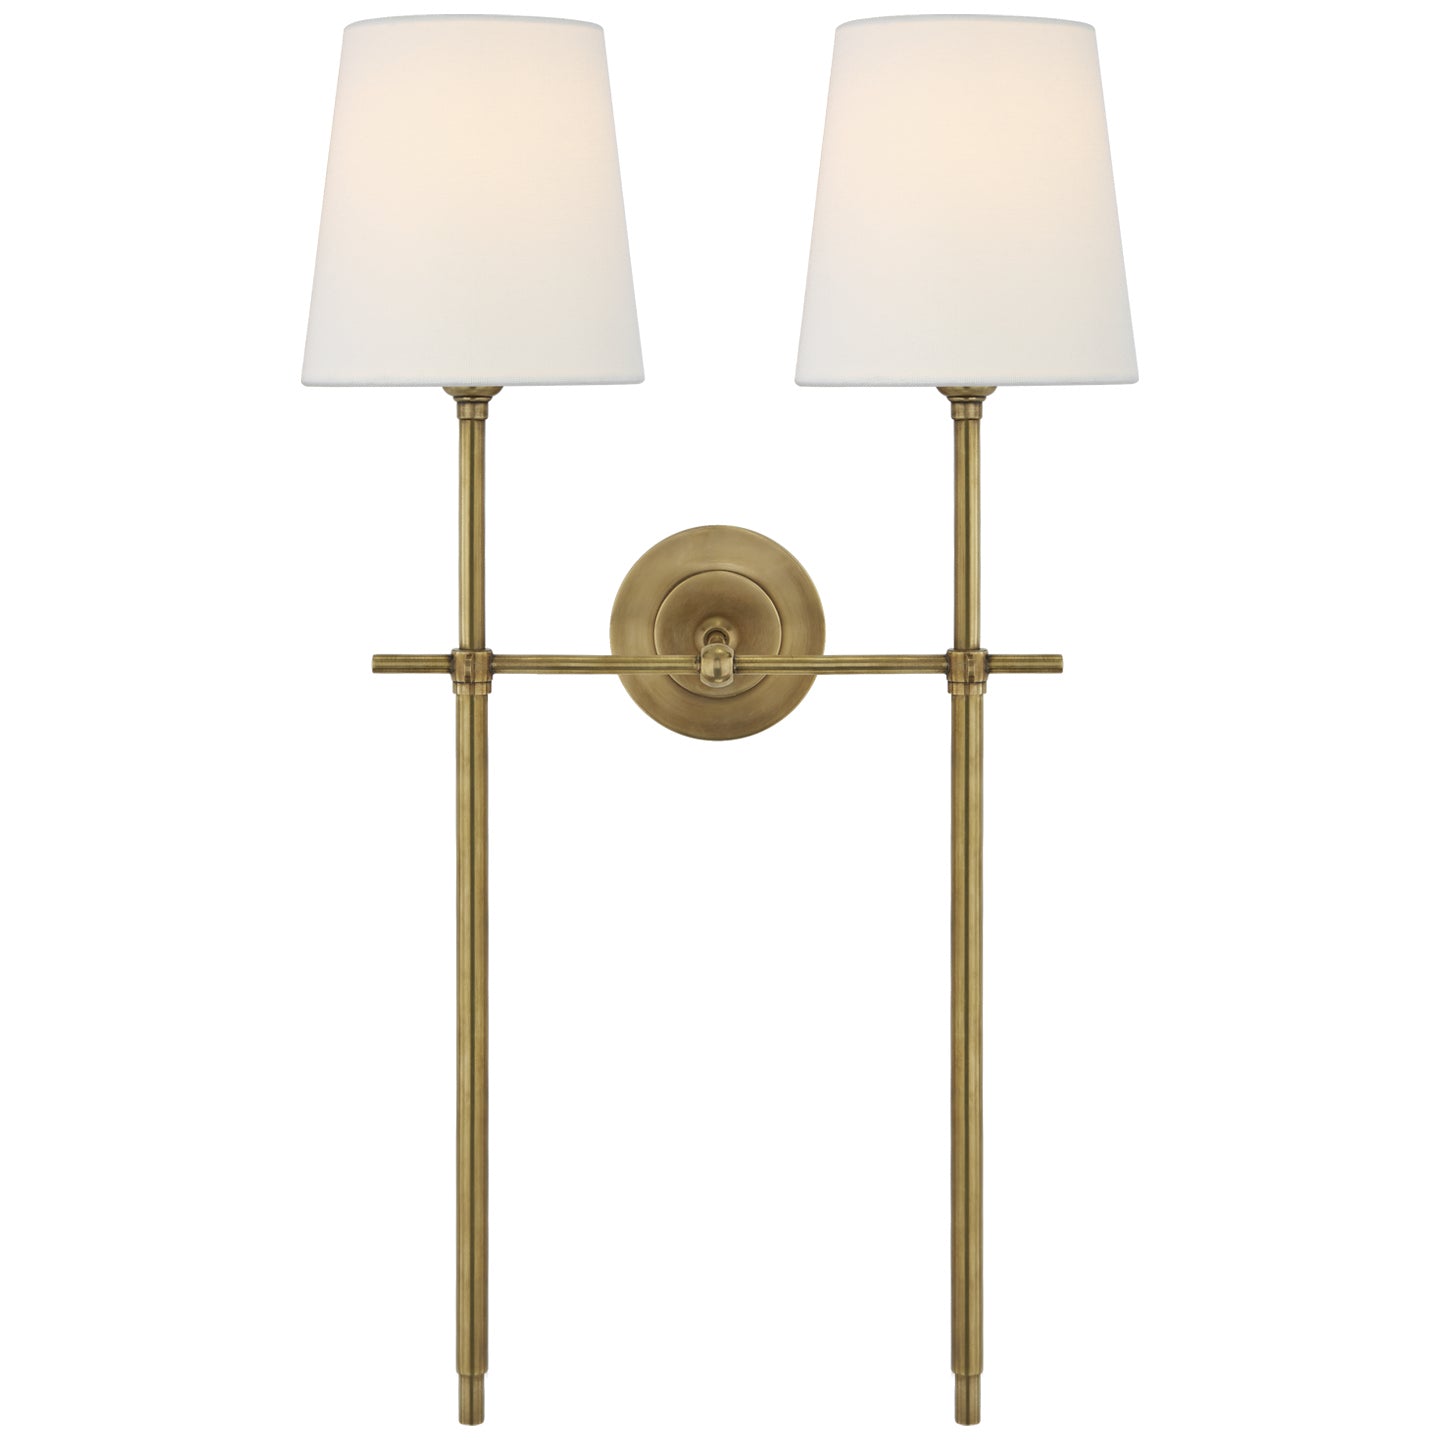 Visual Comfort Signature Canada - Two Light Wall Sconce - Bryant - Hand-Rubbed Antique Brass- Union Lighting Luminaires Decor